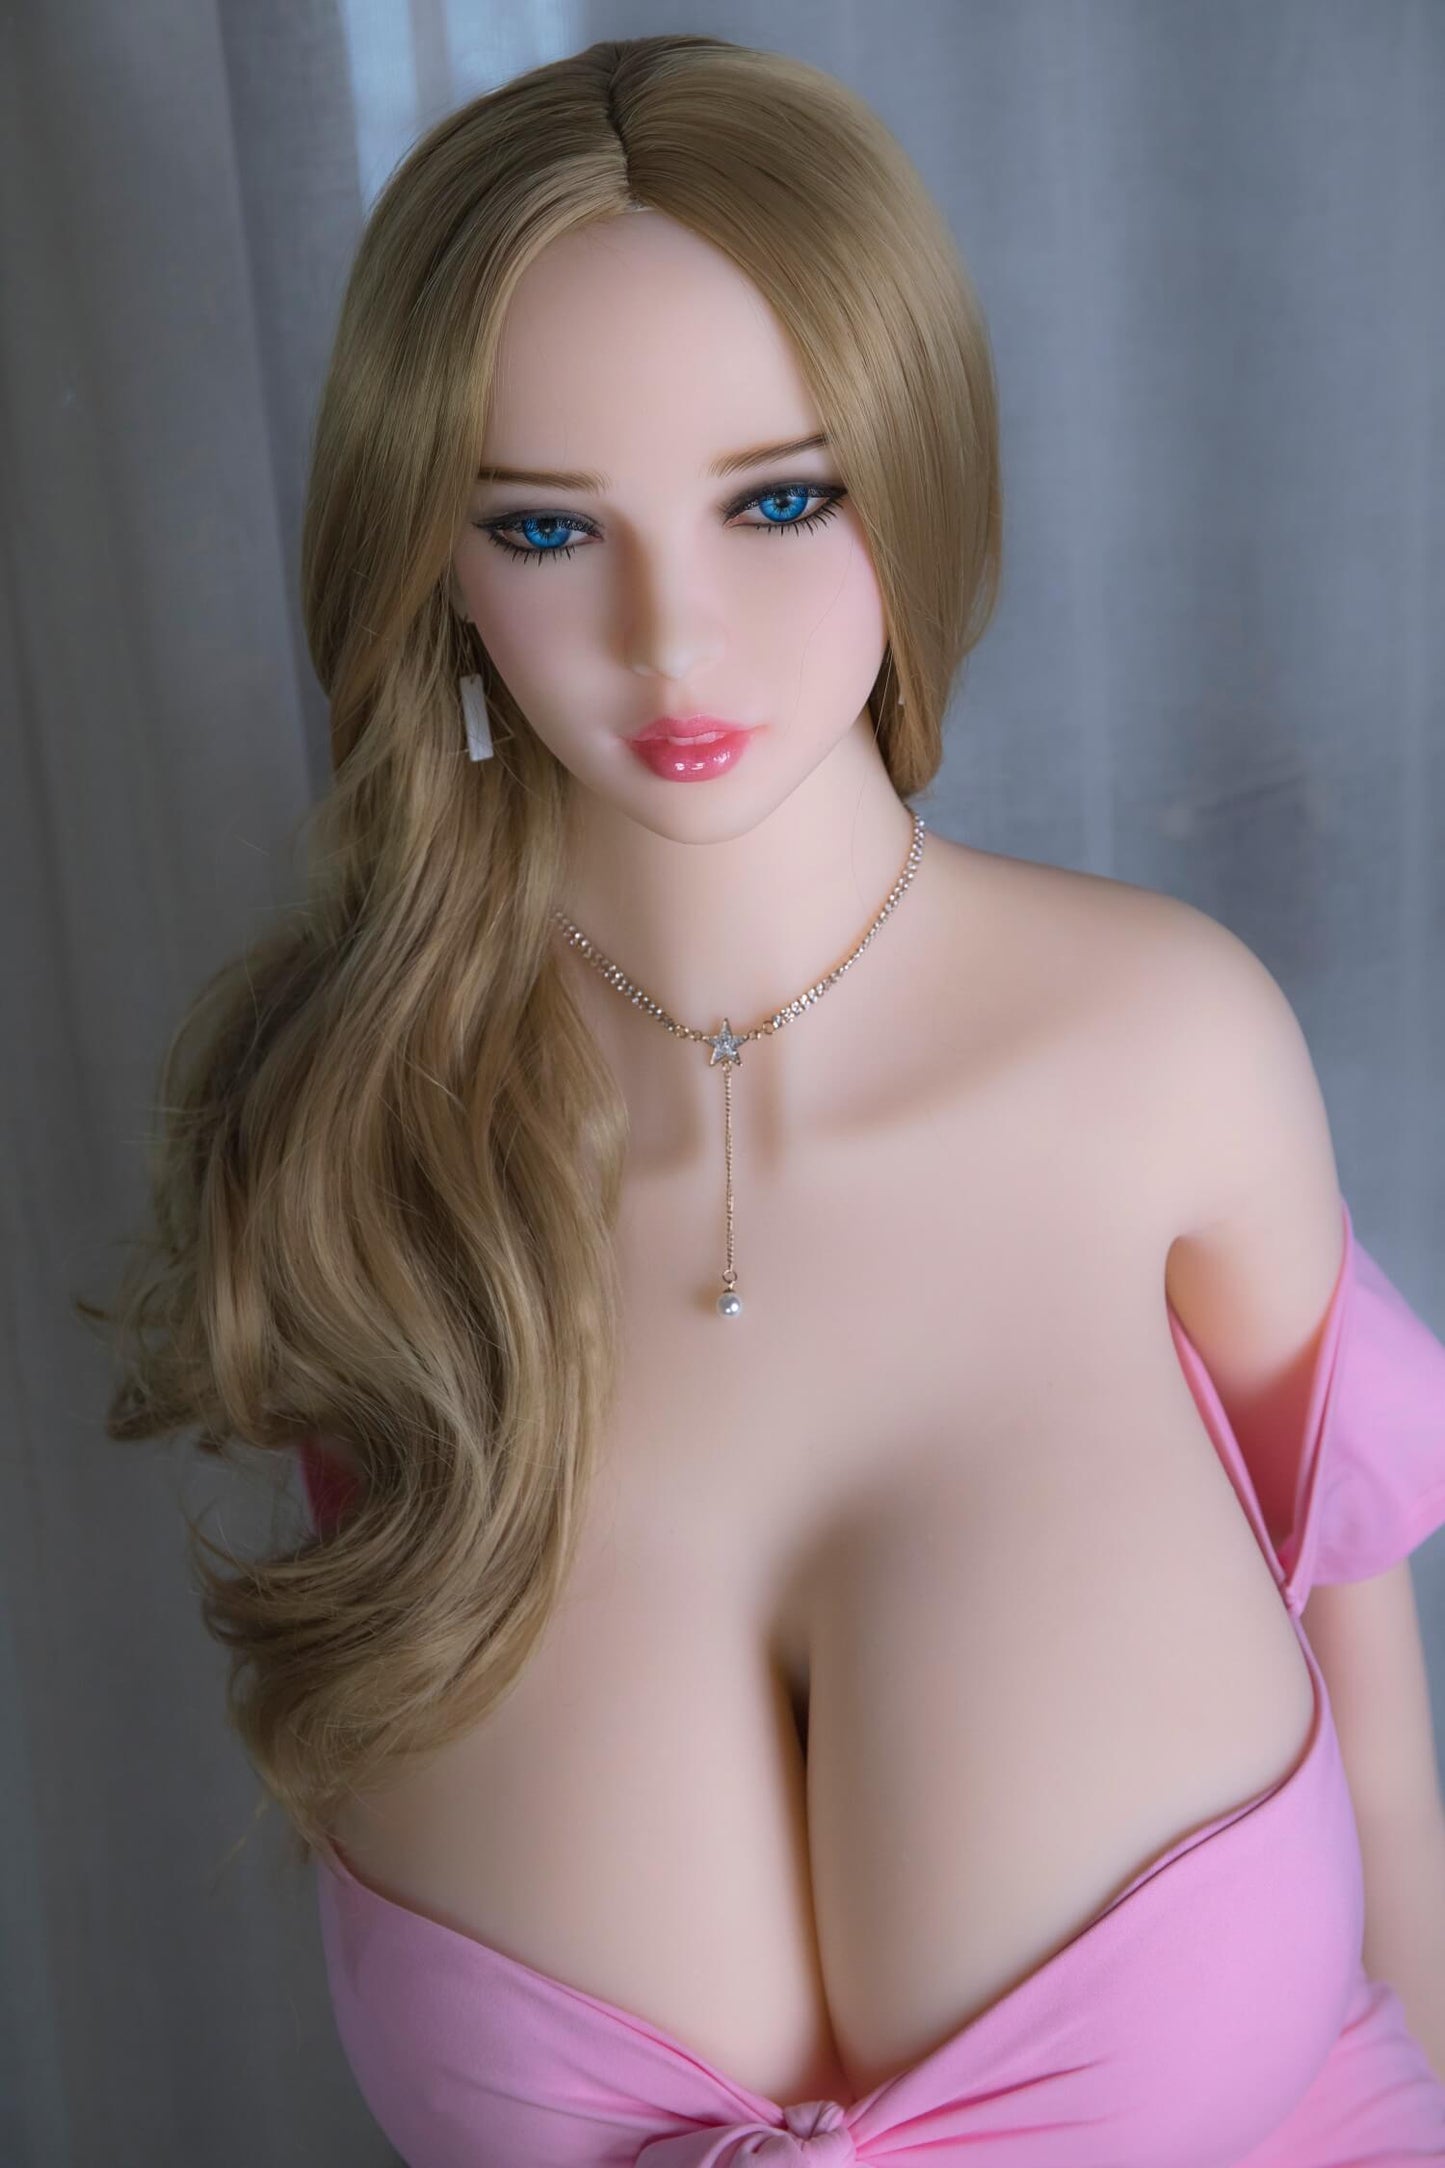 Irene biggest papaya breast sex doll - cheap sexy real sex doll here